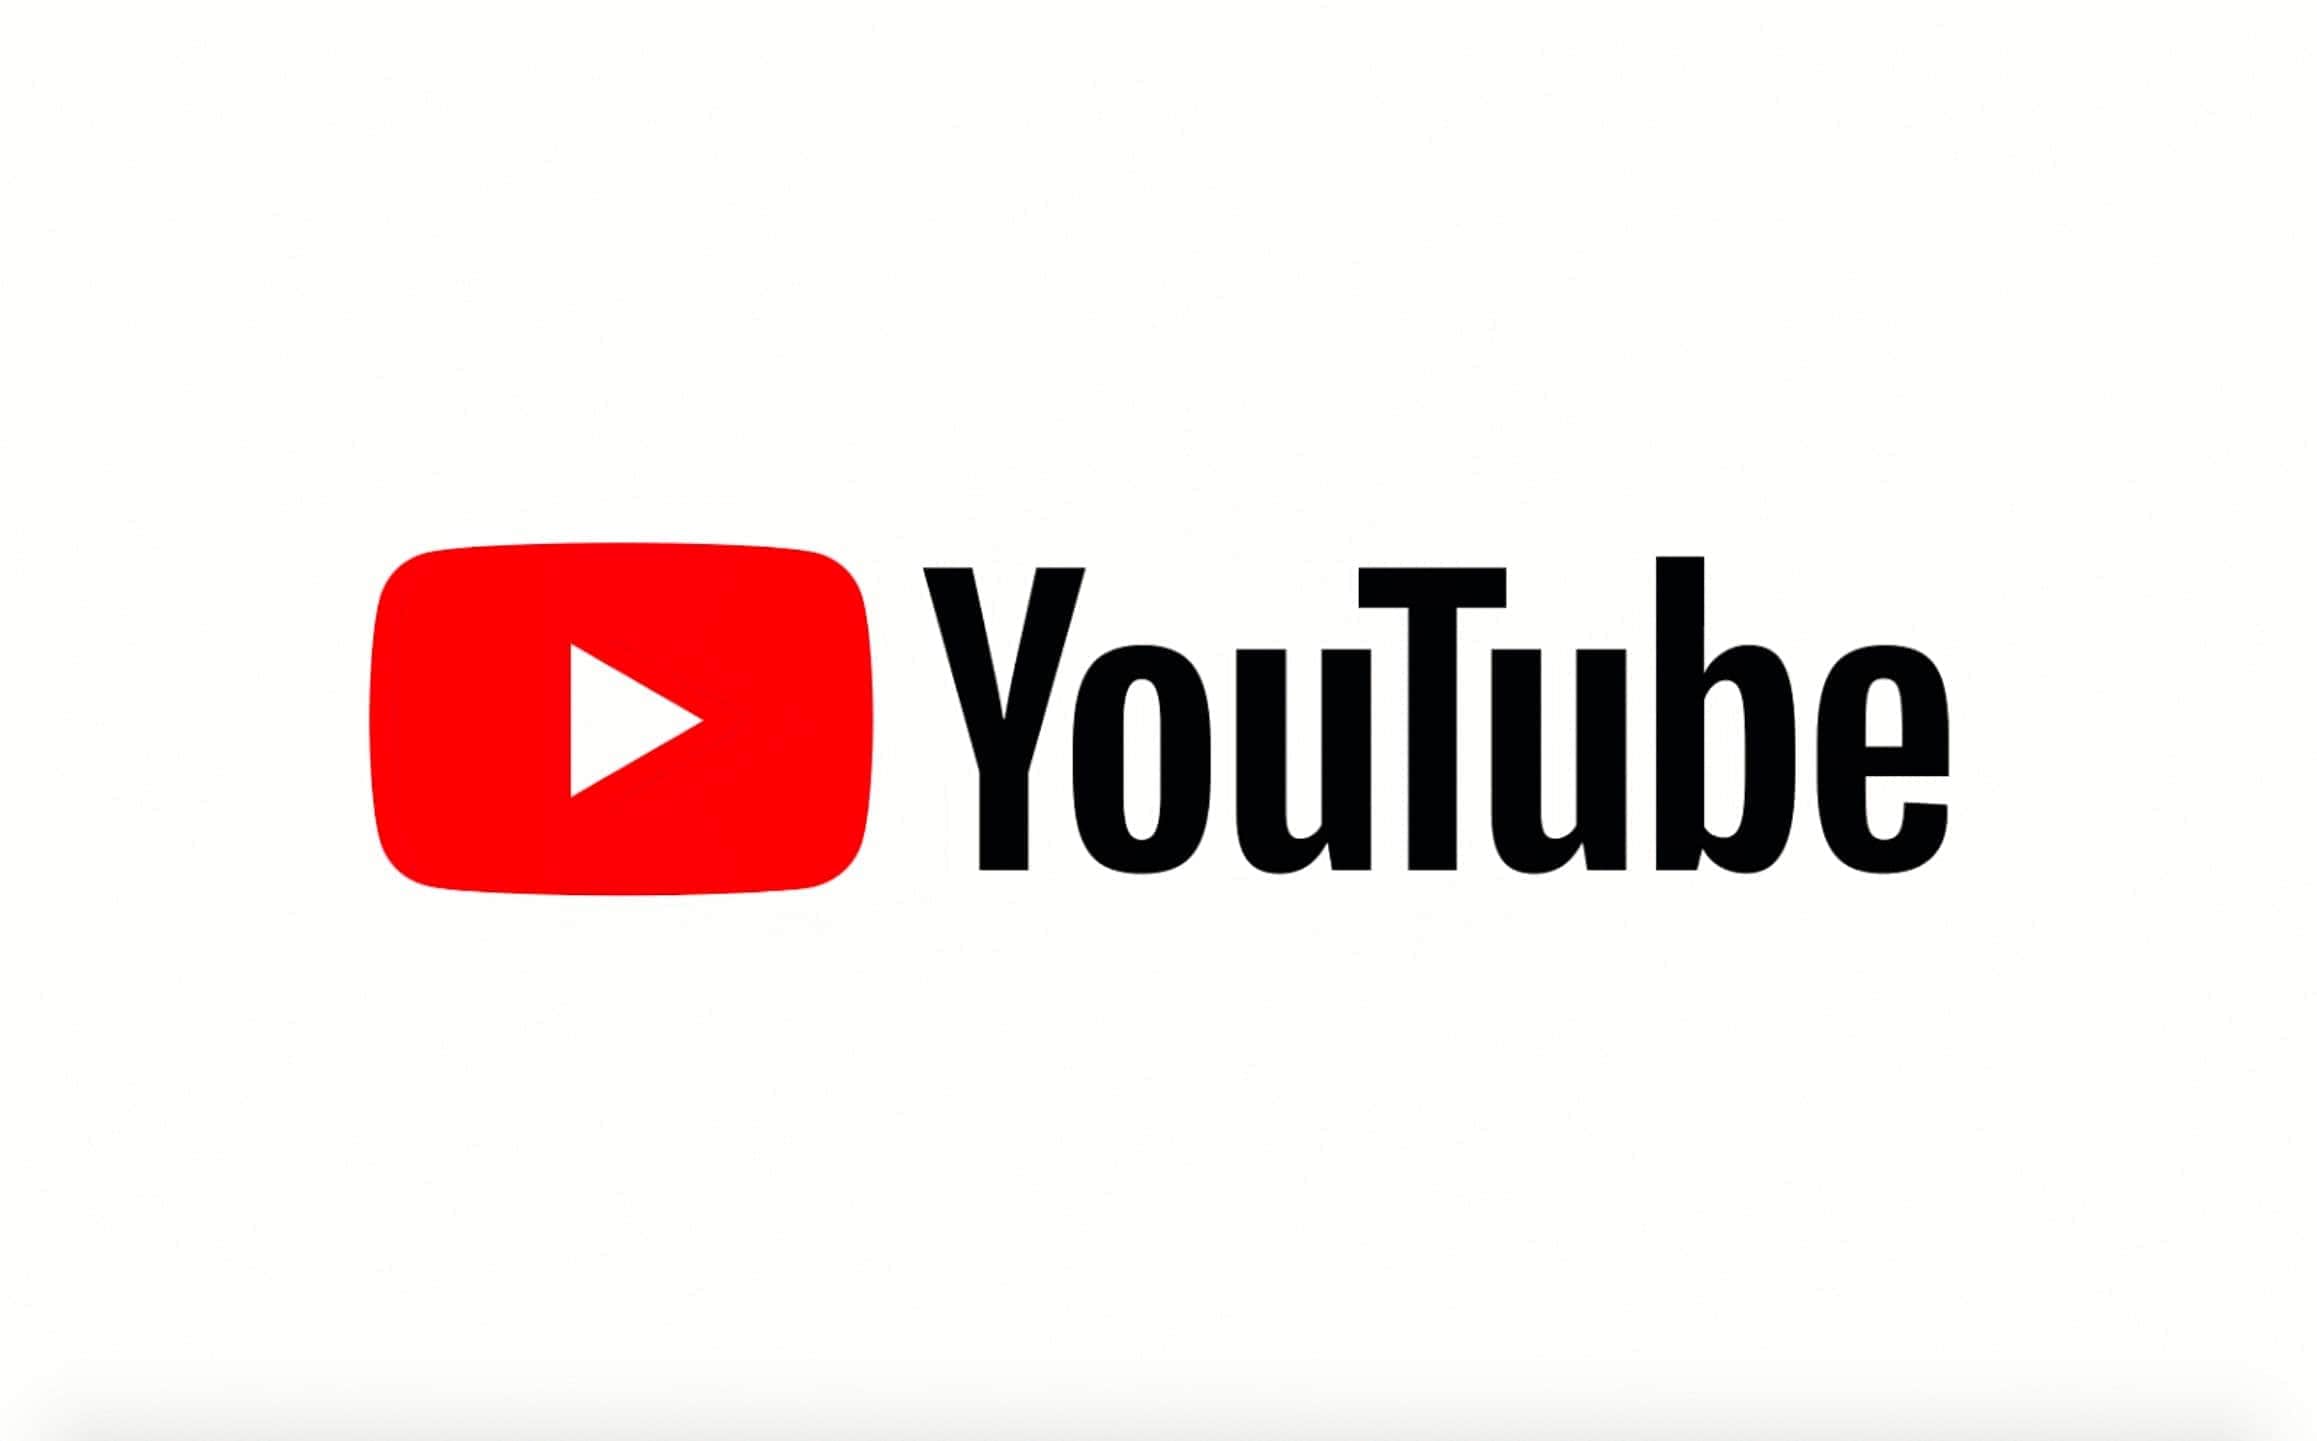 https://www.androidworld.it/wp-content/uploads/2020/04/YouTube-Nuovo-Logo.png